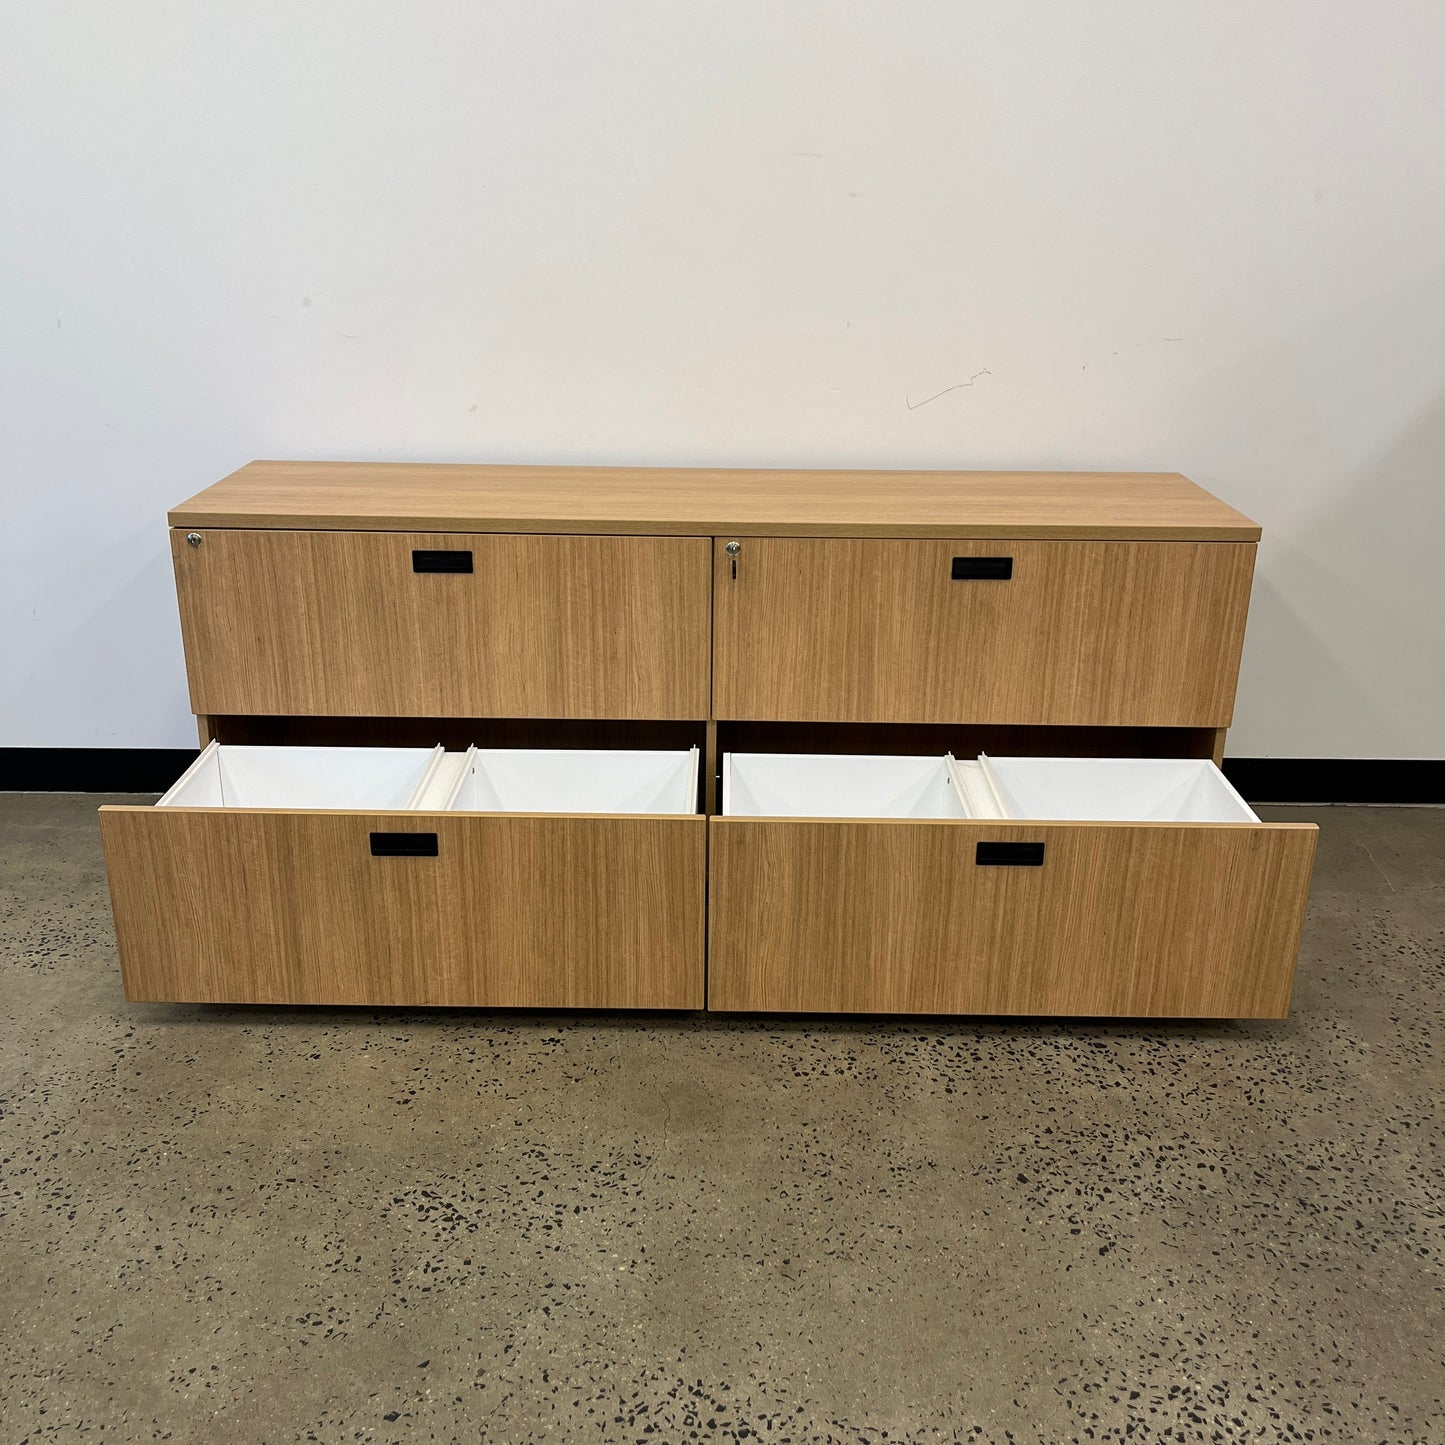 Long Buffet Style File Cabinets in Wooden Laminate